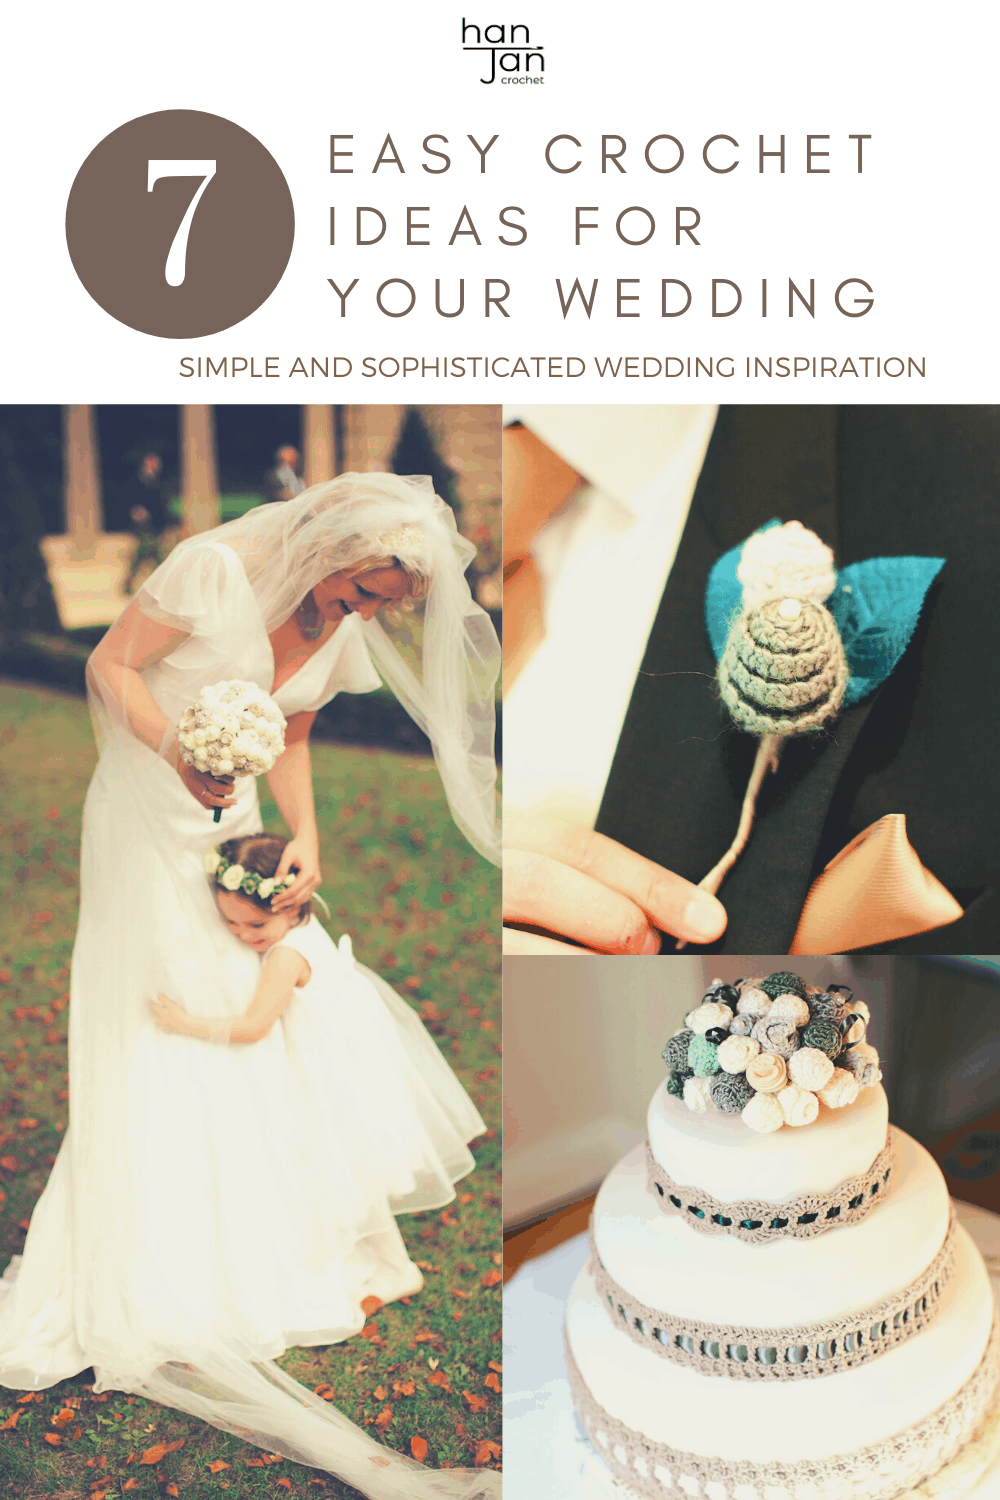 7 simple and sophisticated wedding crochet ideas and inspiration to DIY for your wedding. 